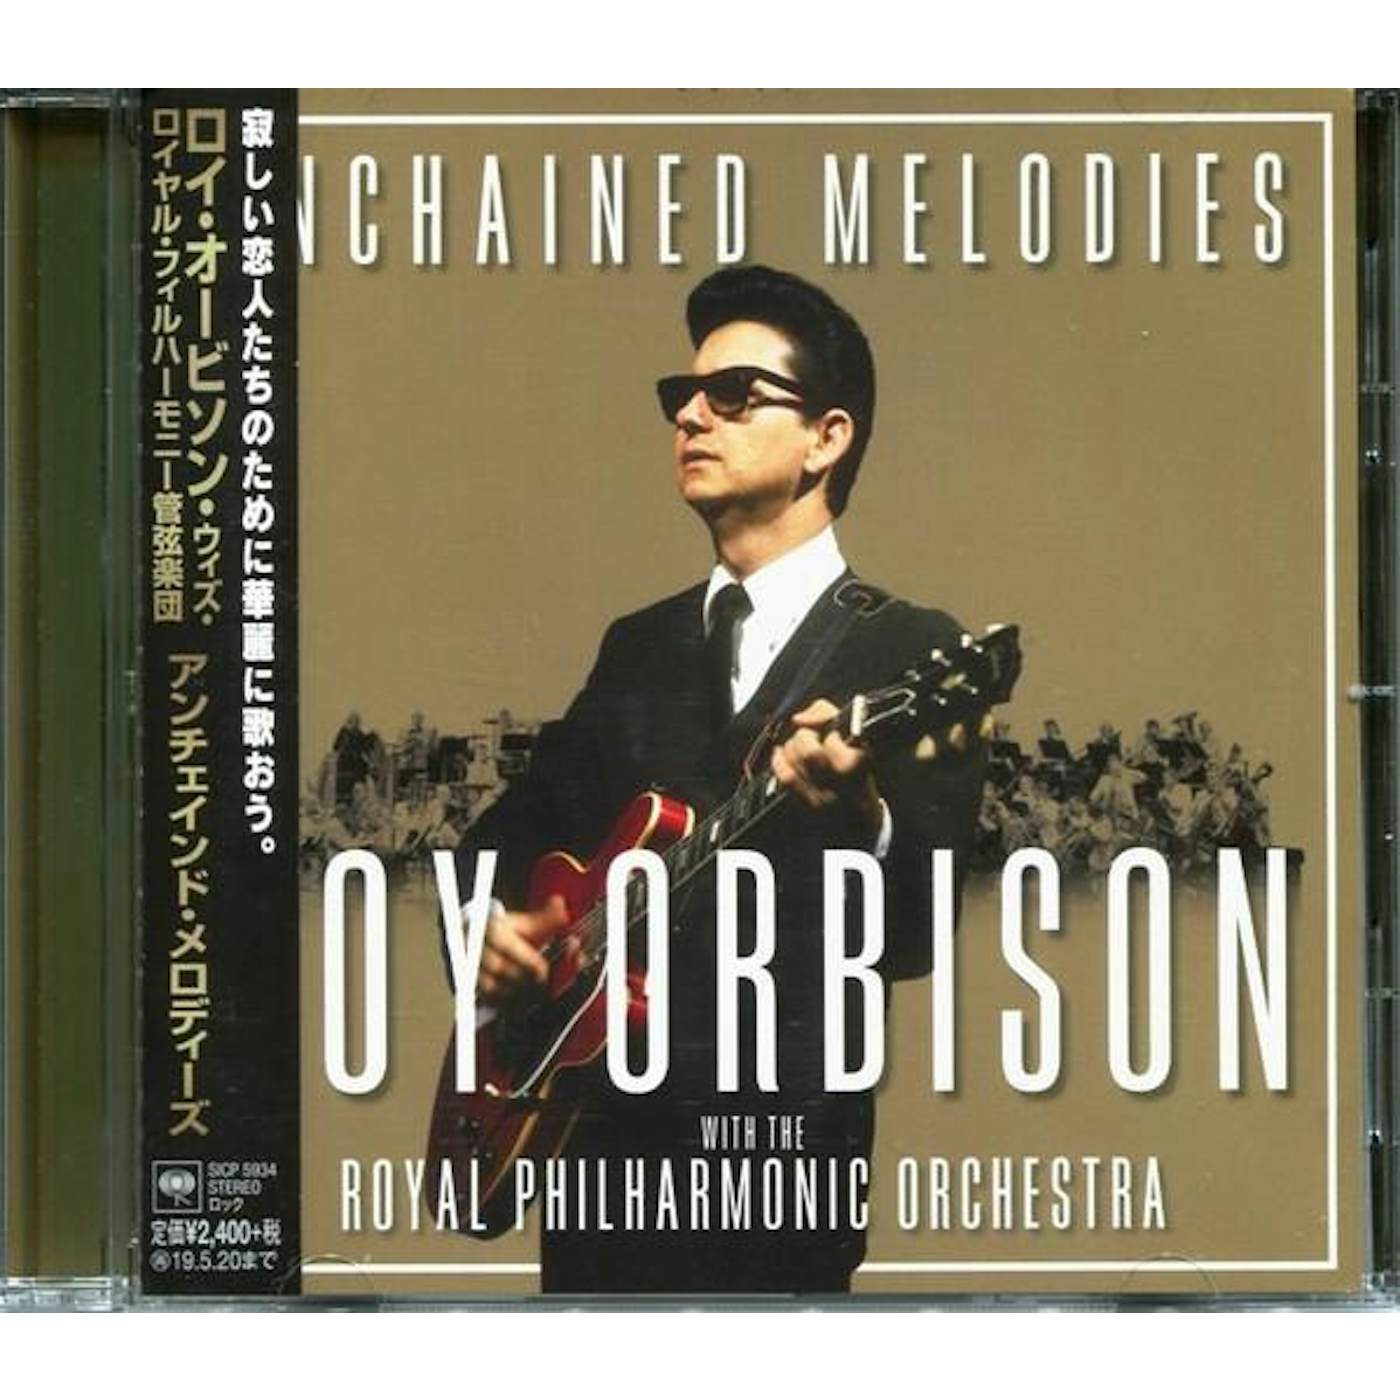 UNCHAINED MELODIES: ROY ORBISON WITH THE ROYAL PHILHARMONIC